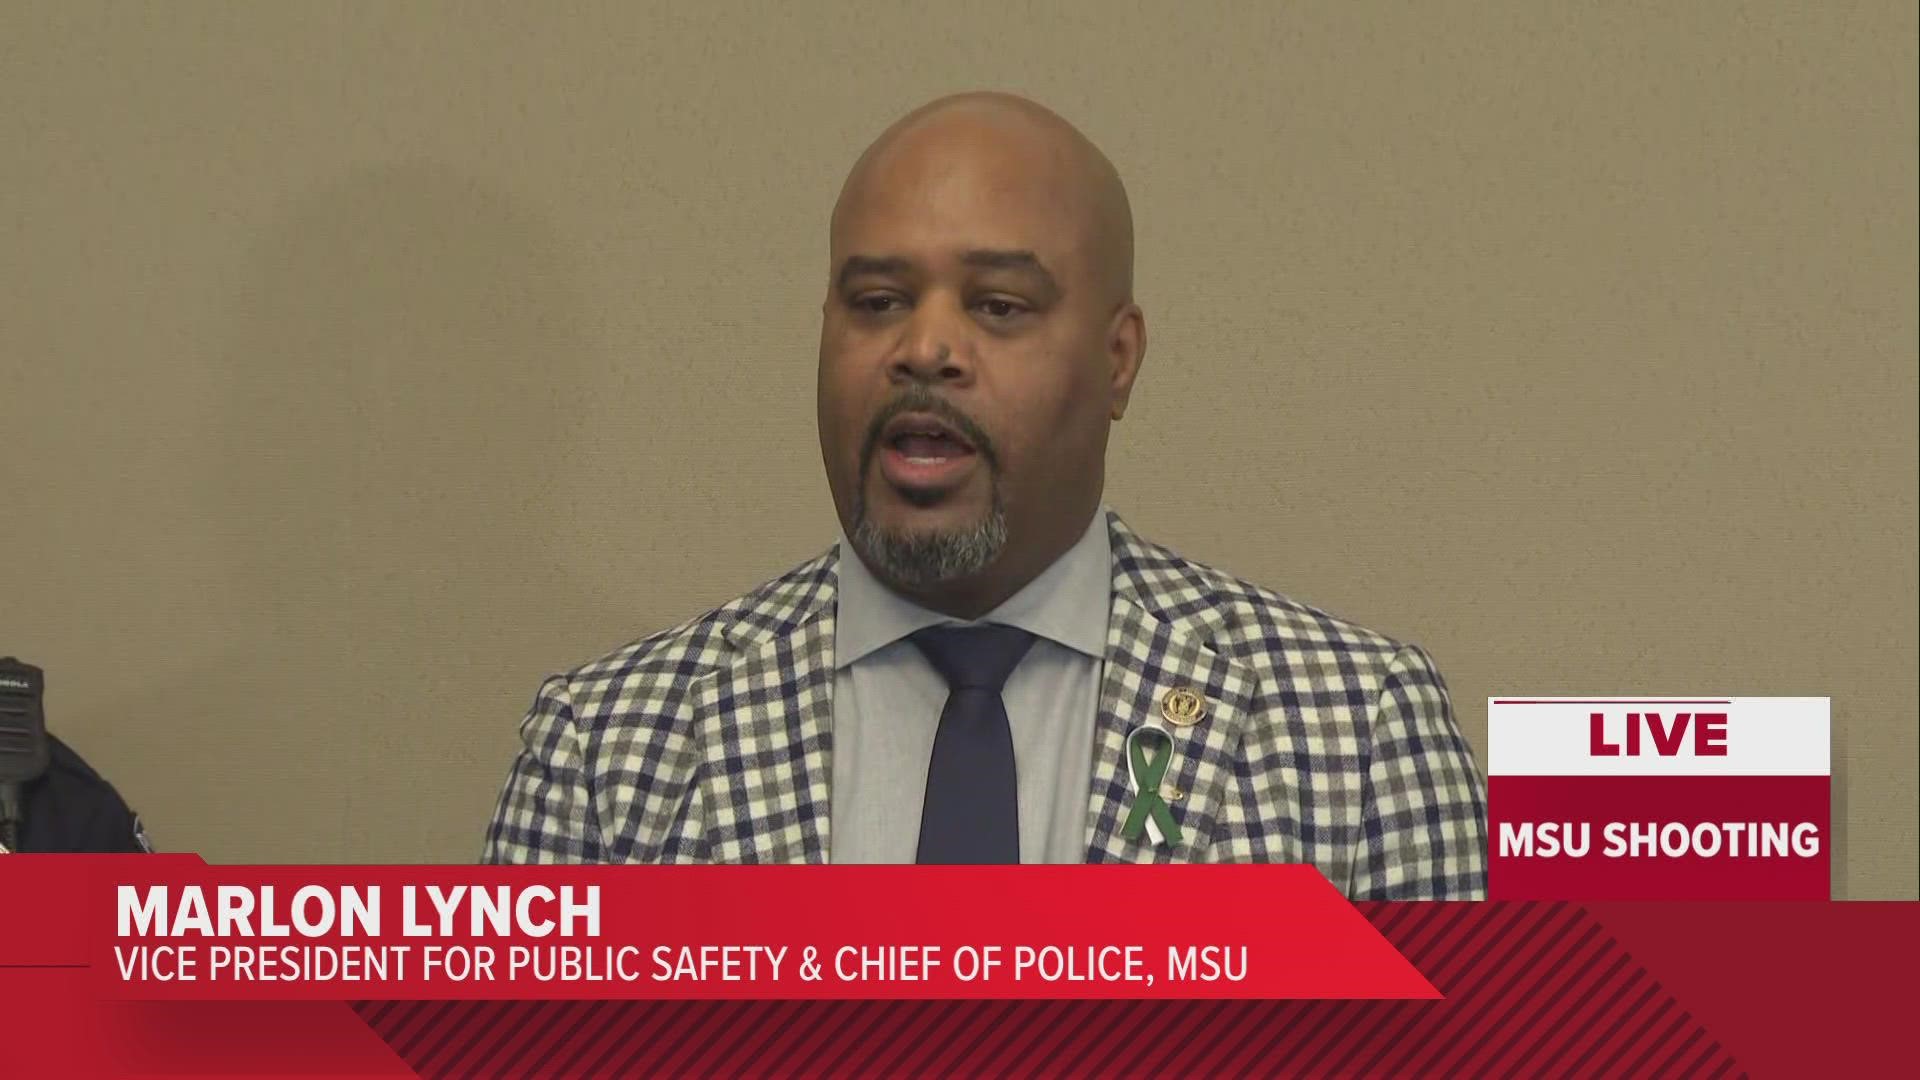 Marlon Lynch, Vice President for Public Safety and Chief of Police, MSU, spoke about how Michigan State students in Berkey Hall helped out fellow wounded students.